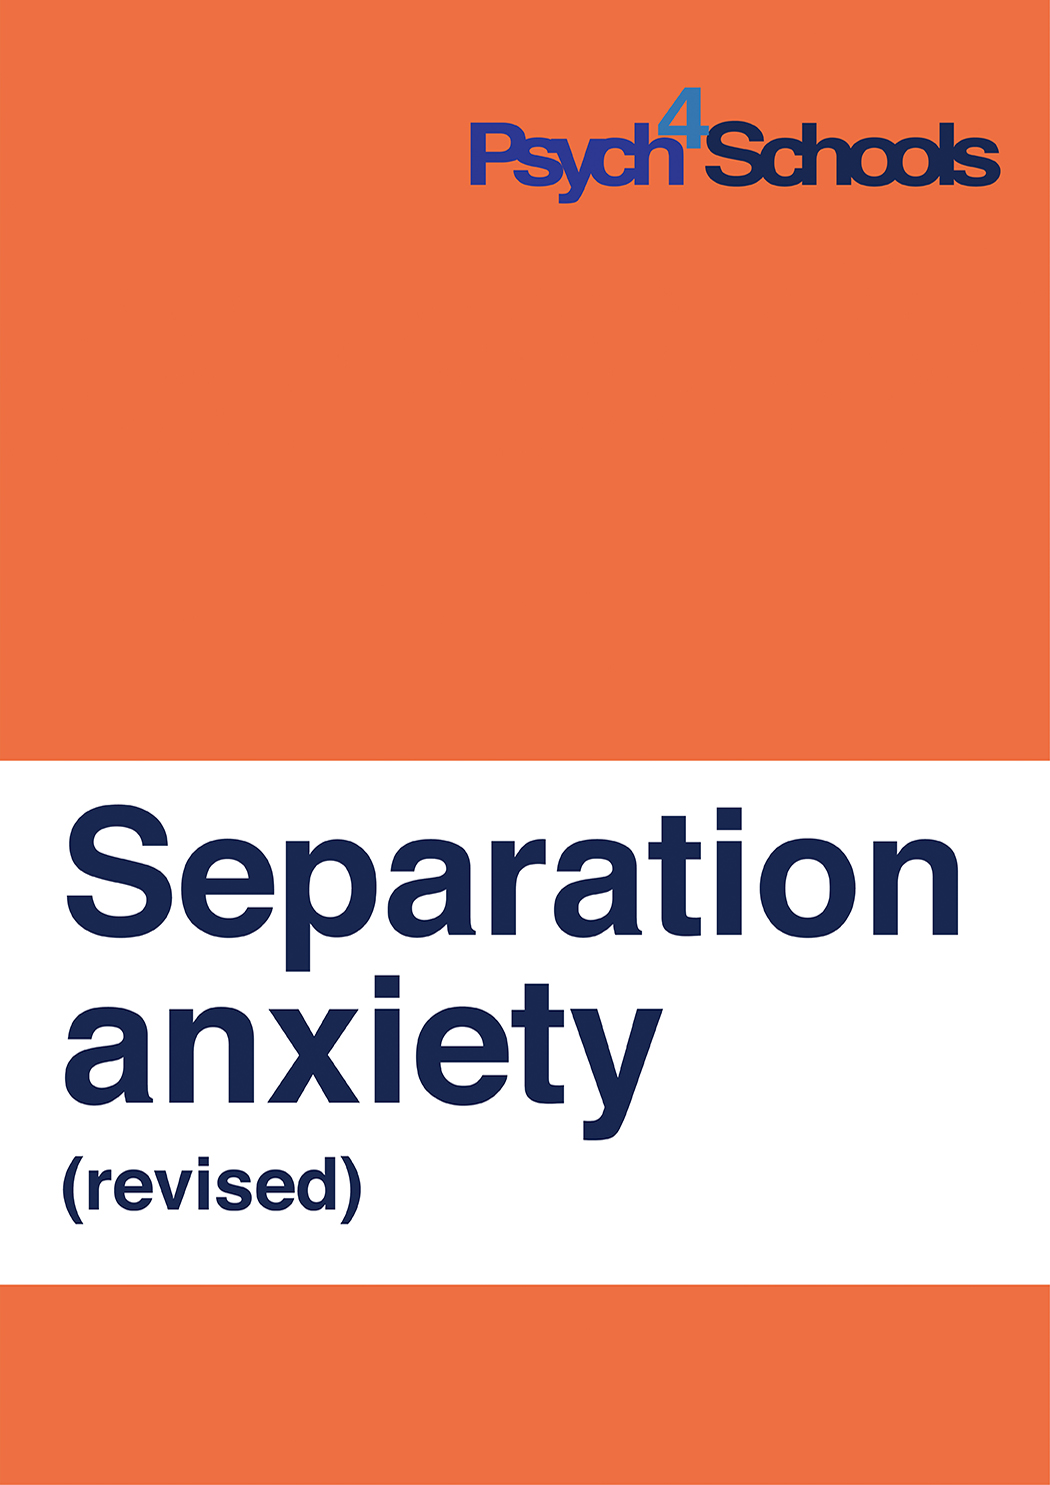 Separation anxiety (revised)